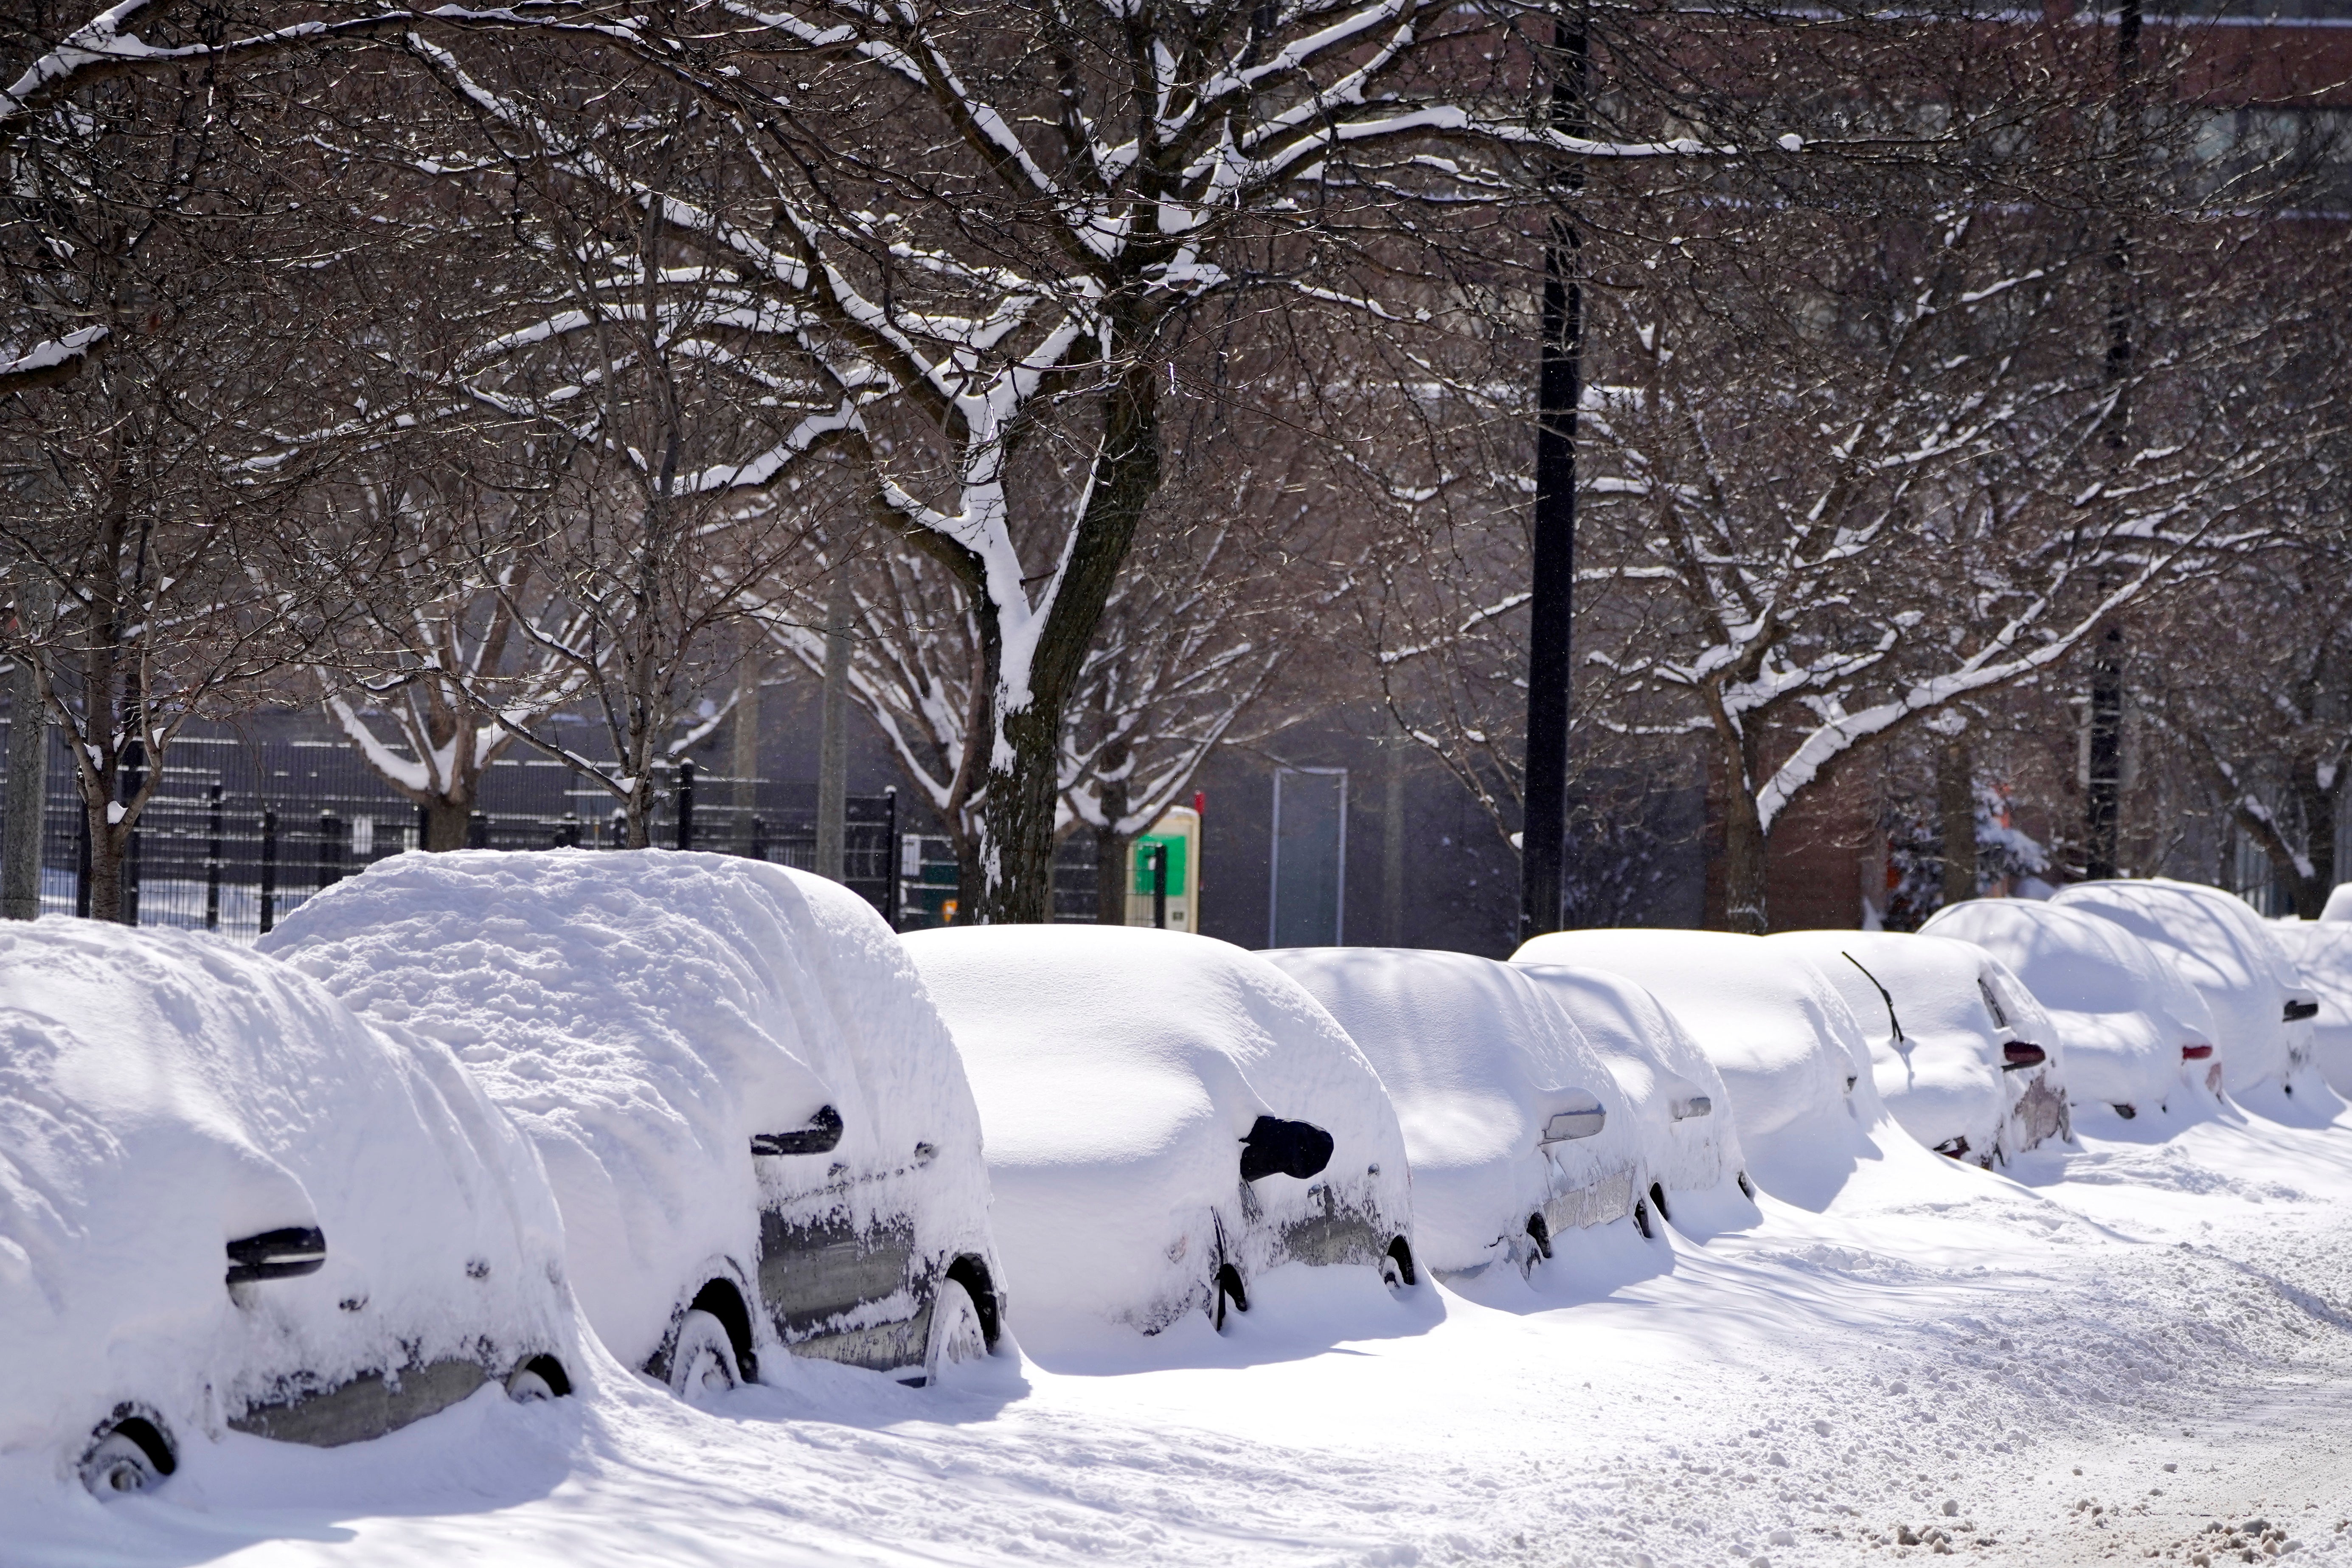 A Guide to Winter Car Storage: 10 Steps to Protect Your Ride